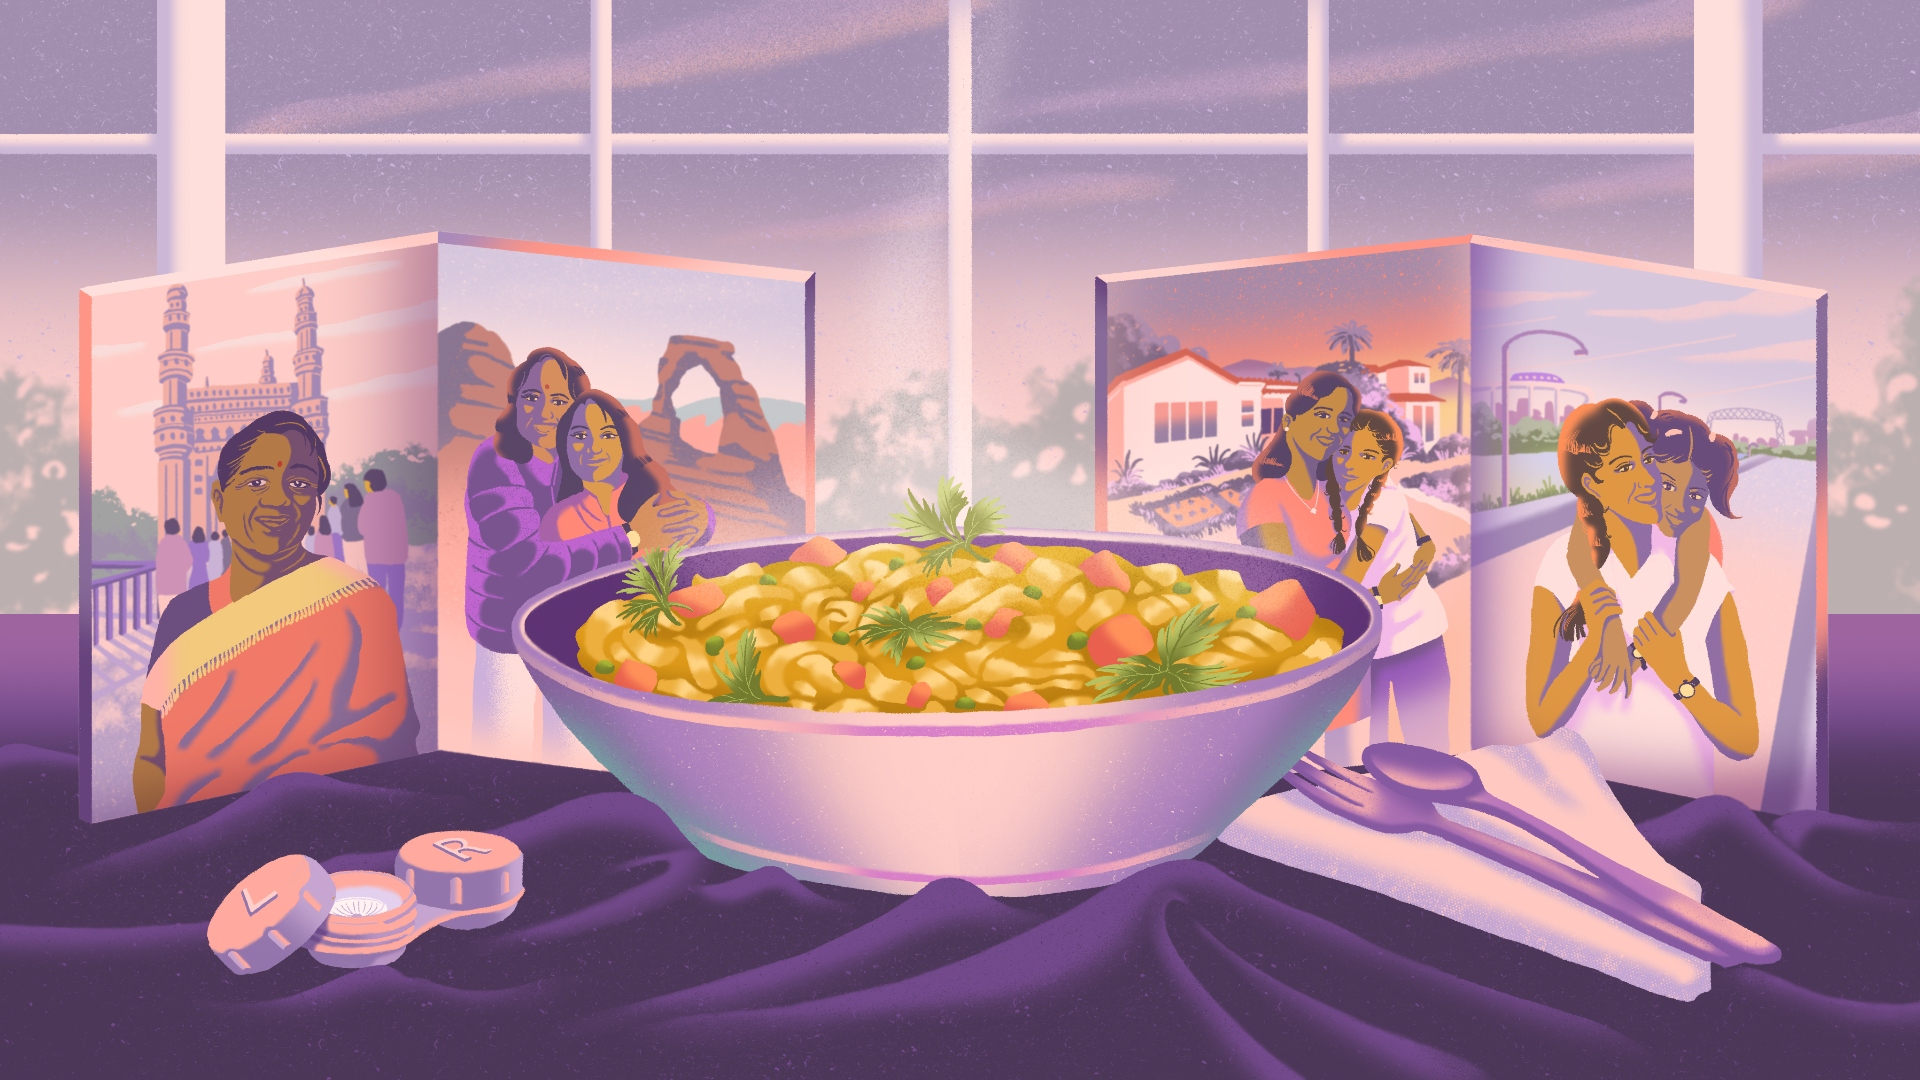 Illustration of a bowl of yellow cabbage curry on a purple table in front of family photographs depicting mothers and daughters